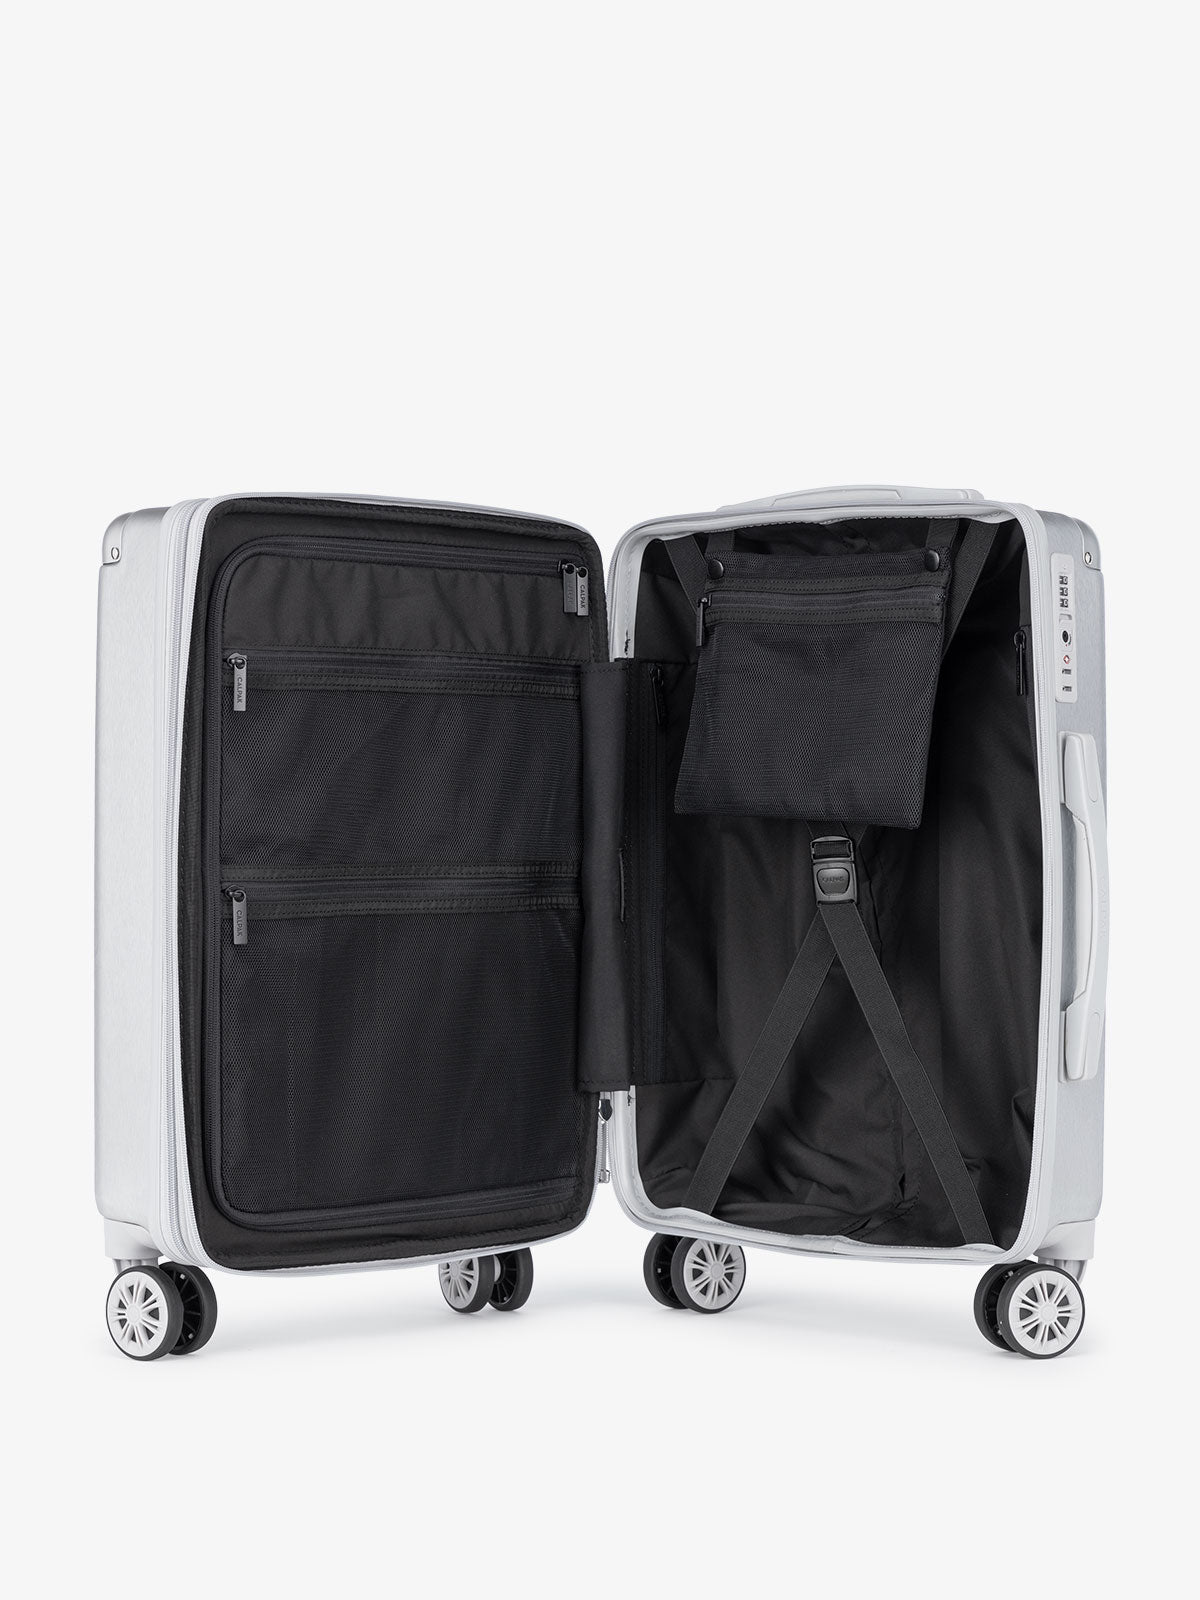 CALPAK Ambeur: hard sided luggage 2 piece set with compartments and compression straps